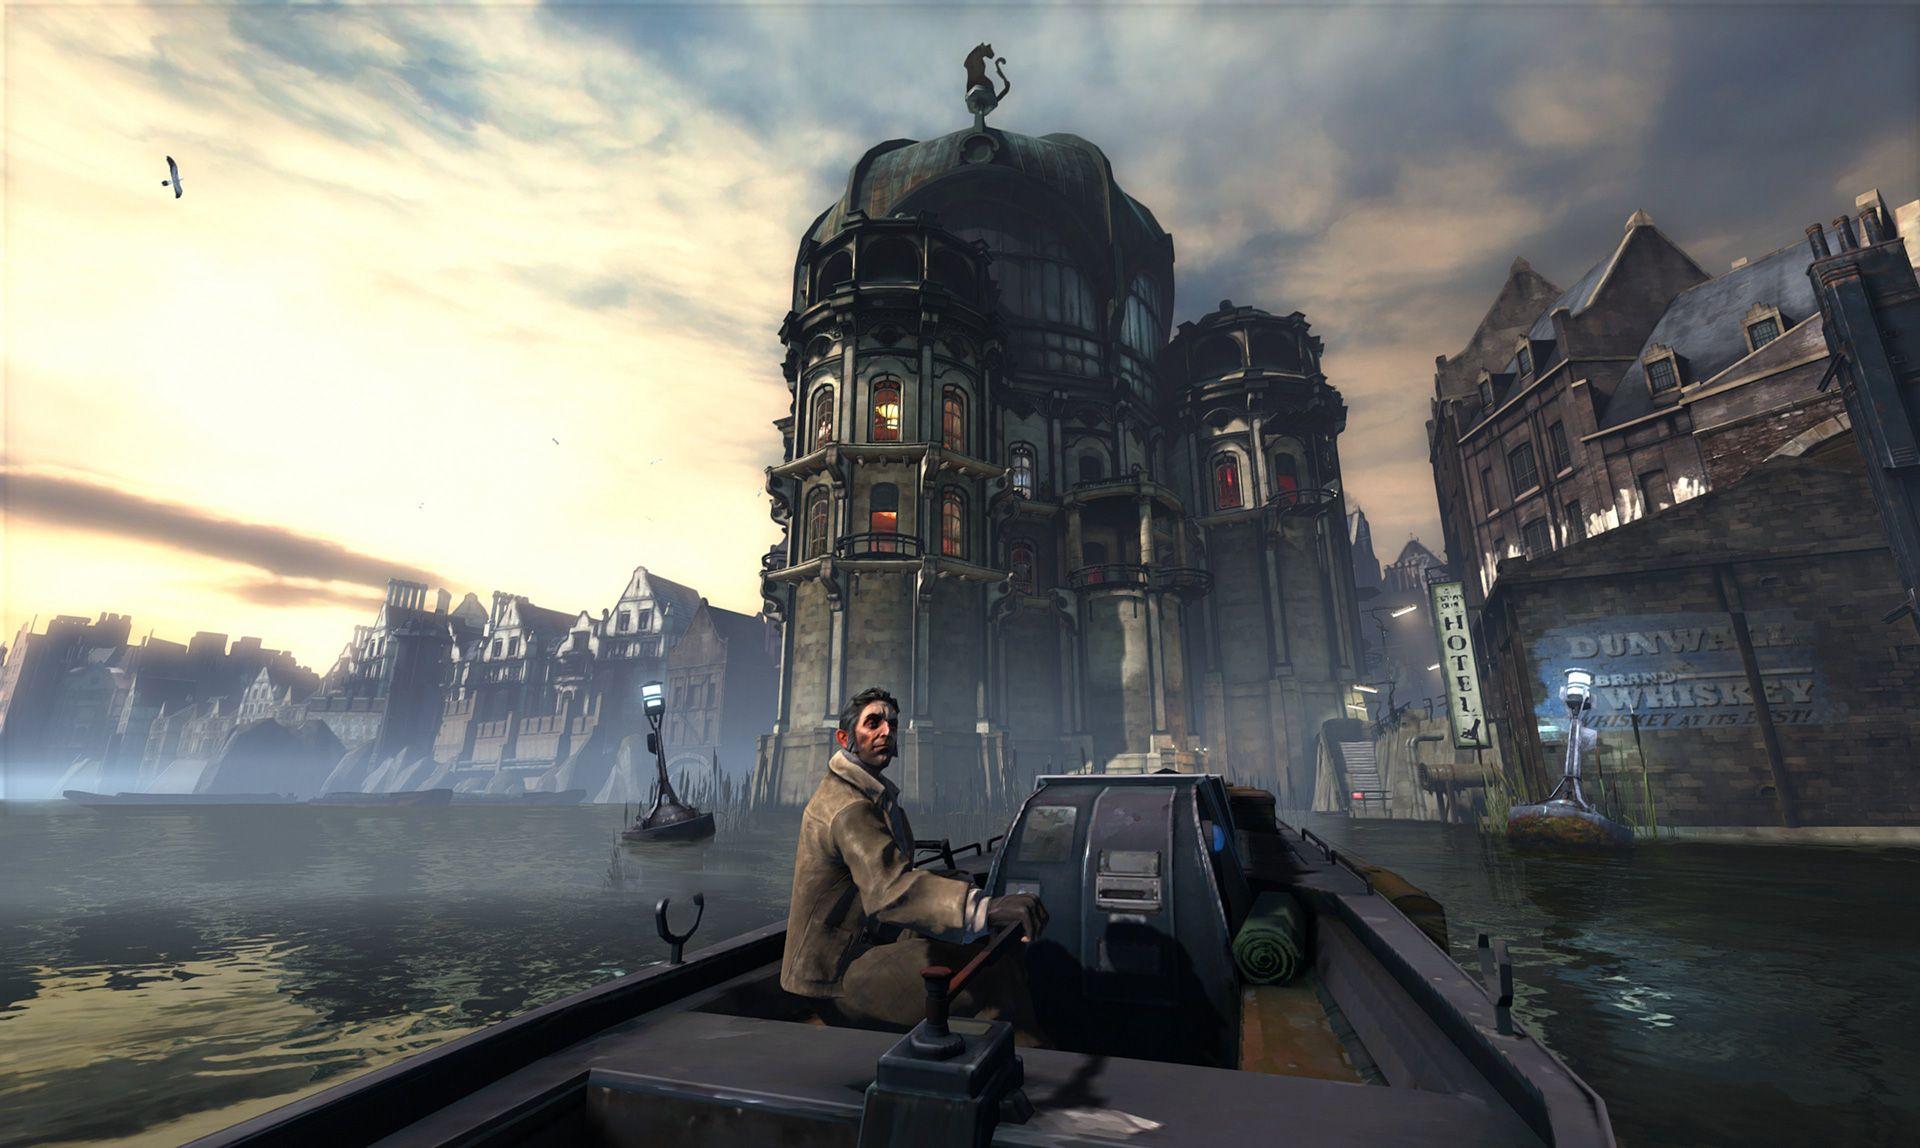 Dishonored Wallpaper for PC. Full HD Picture